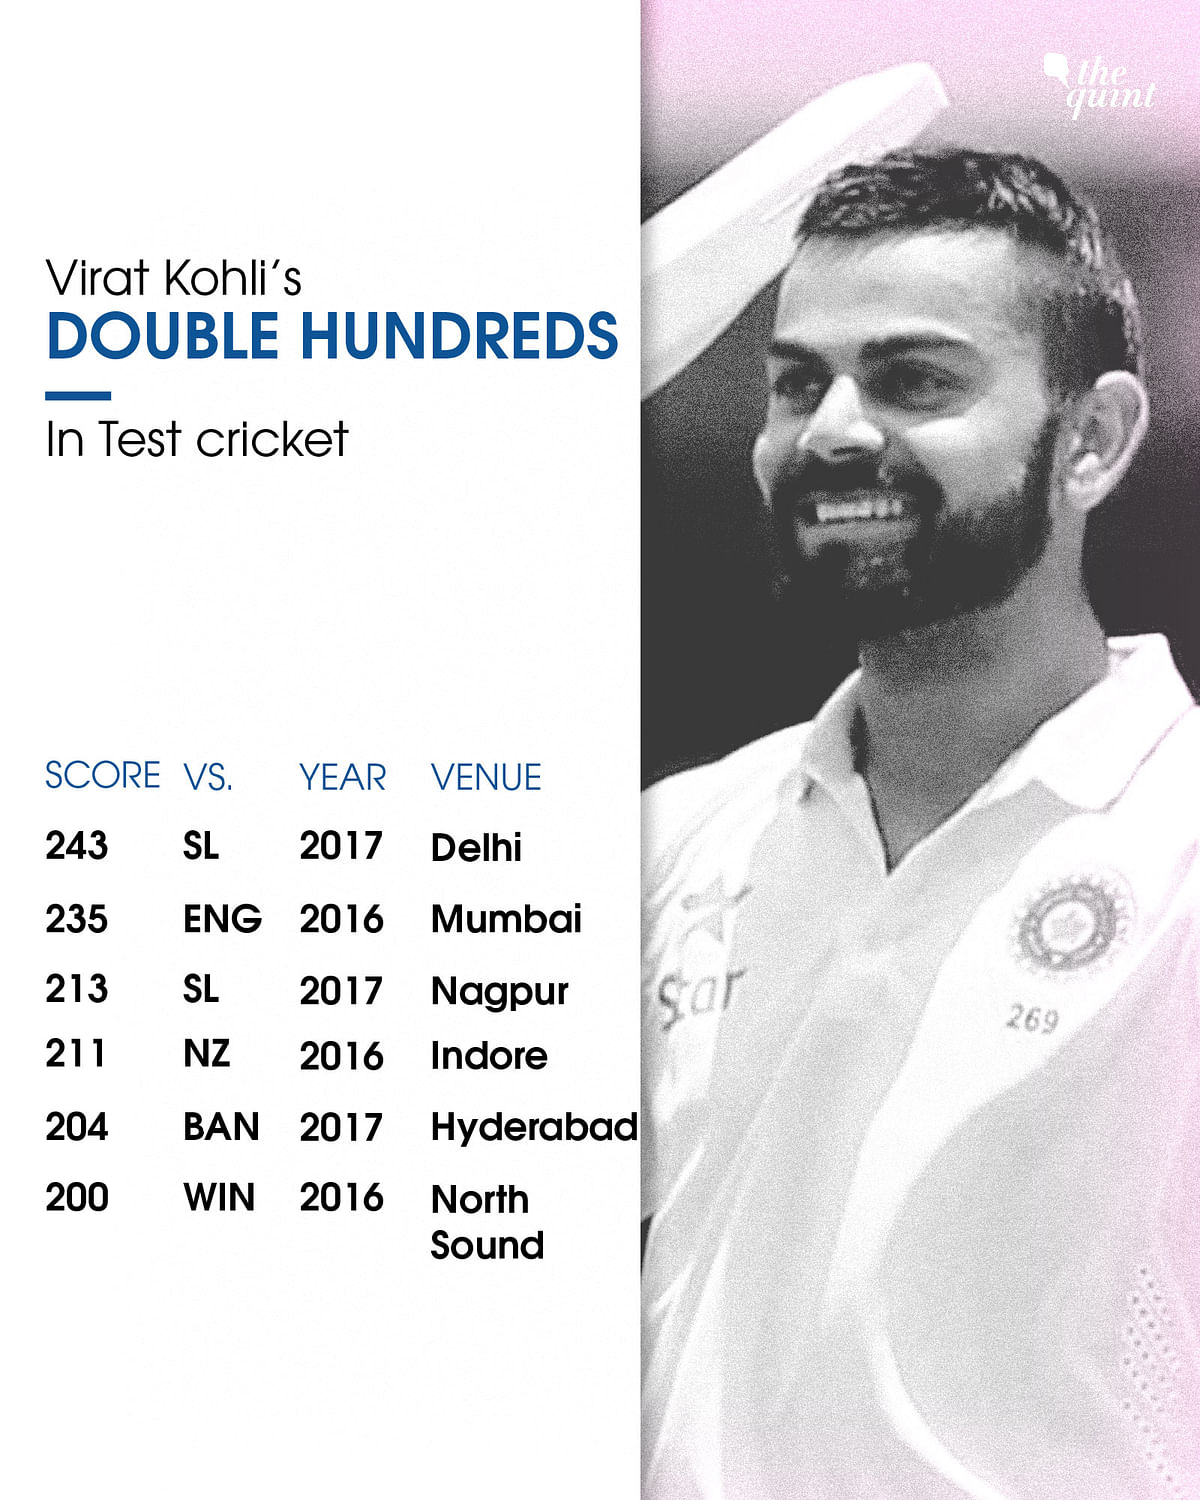 Here’s a wish list reminding Virat Kohli all things he should aspire to achieve in the coming twelve months.